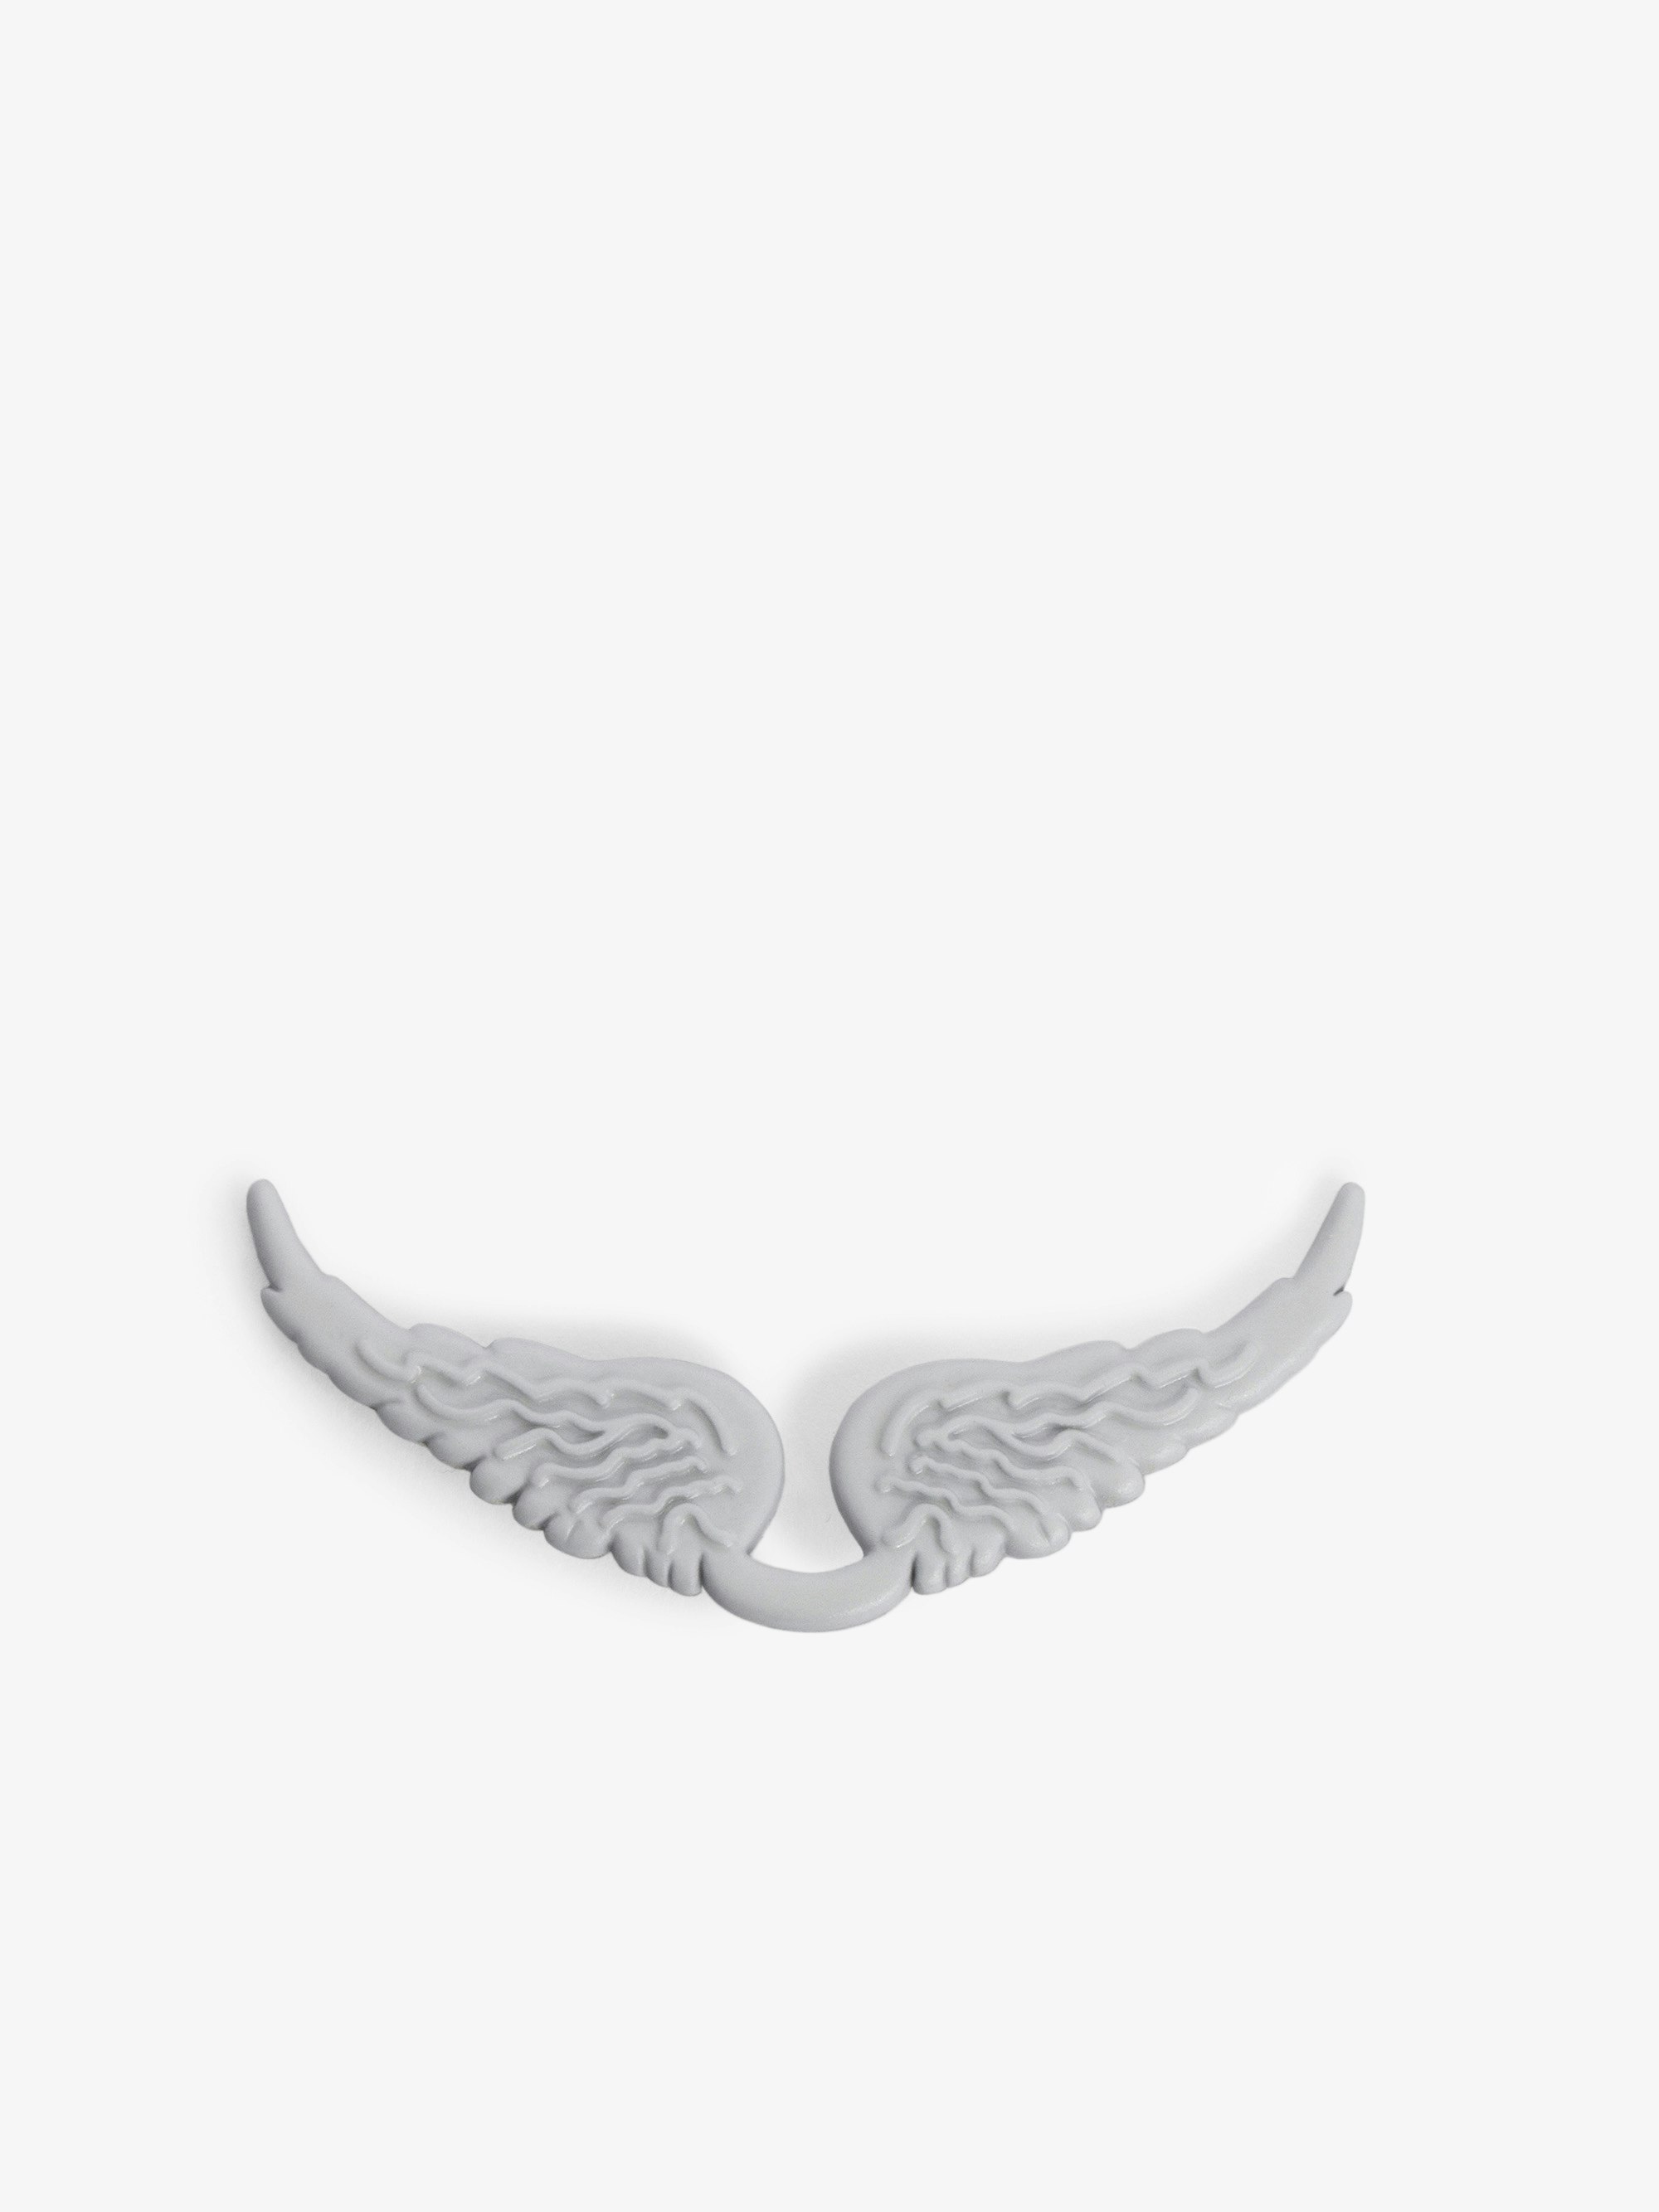 Phosphorescent Swing Your Wings Charm - Removable Swing Your Wings charm.